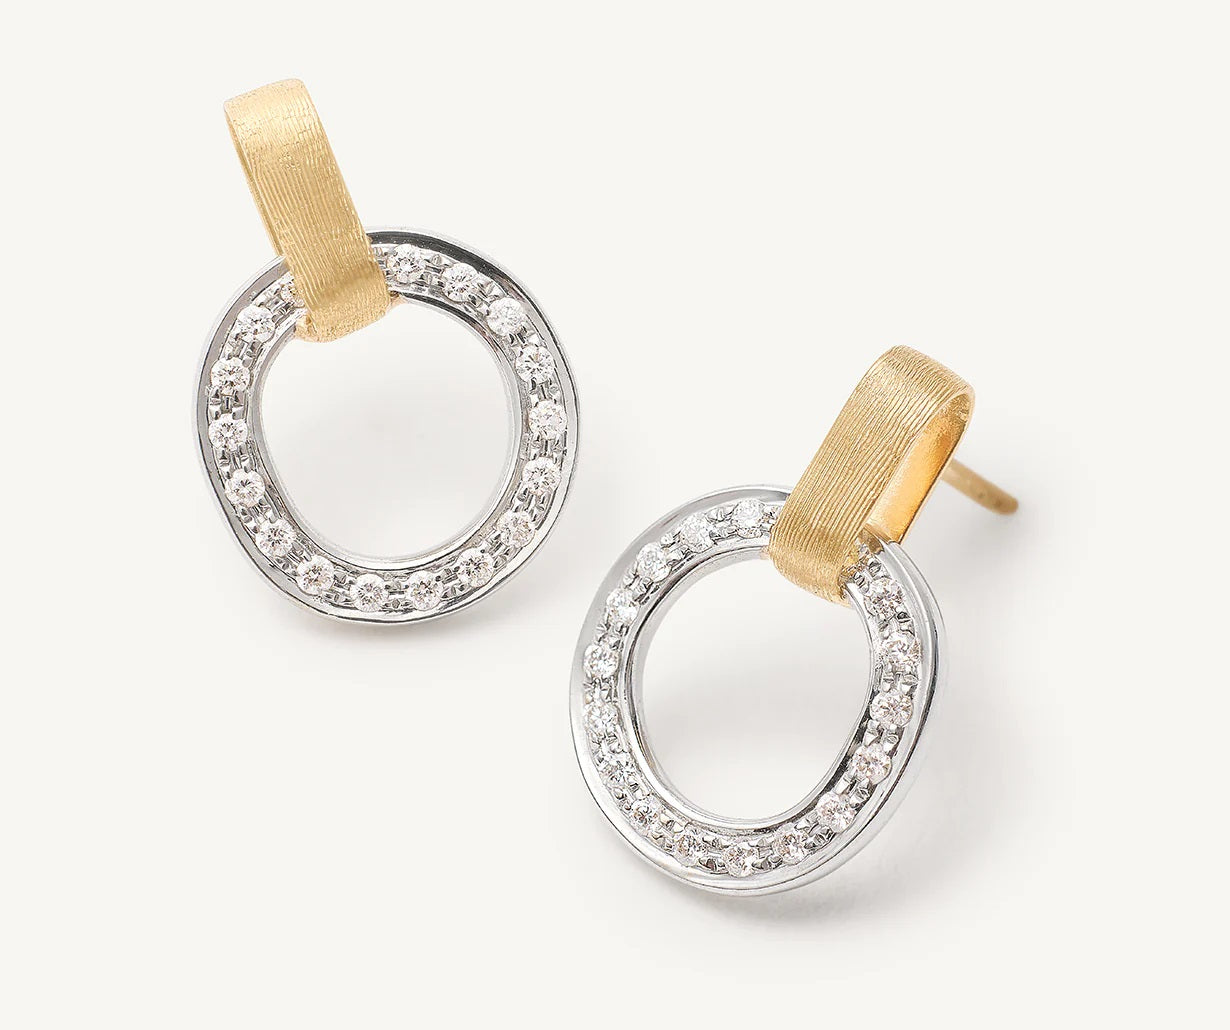 18K YELLOW GOLD AND DIAMOND EARRINGS FROM THE JAIPUR LINK COLLECTION